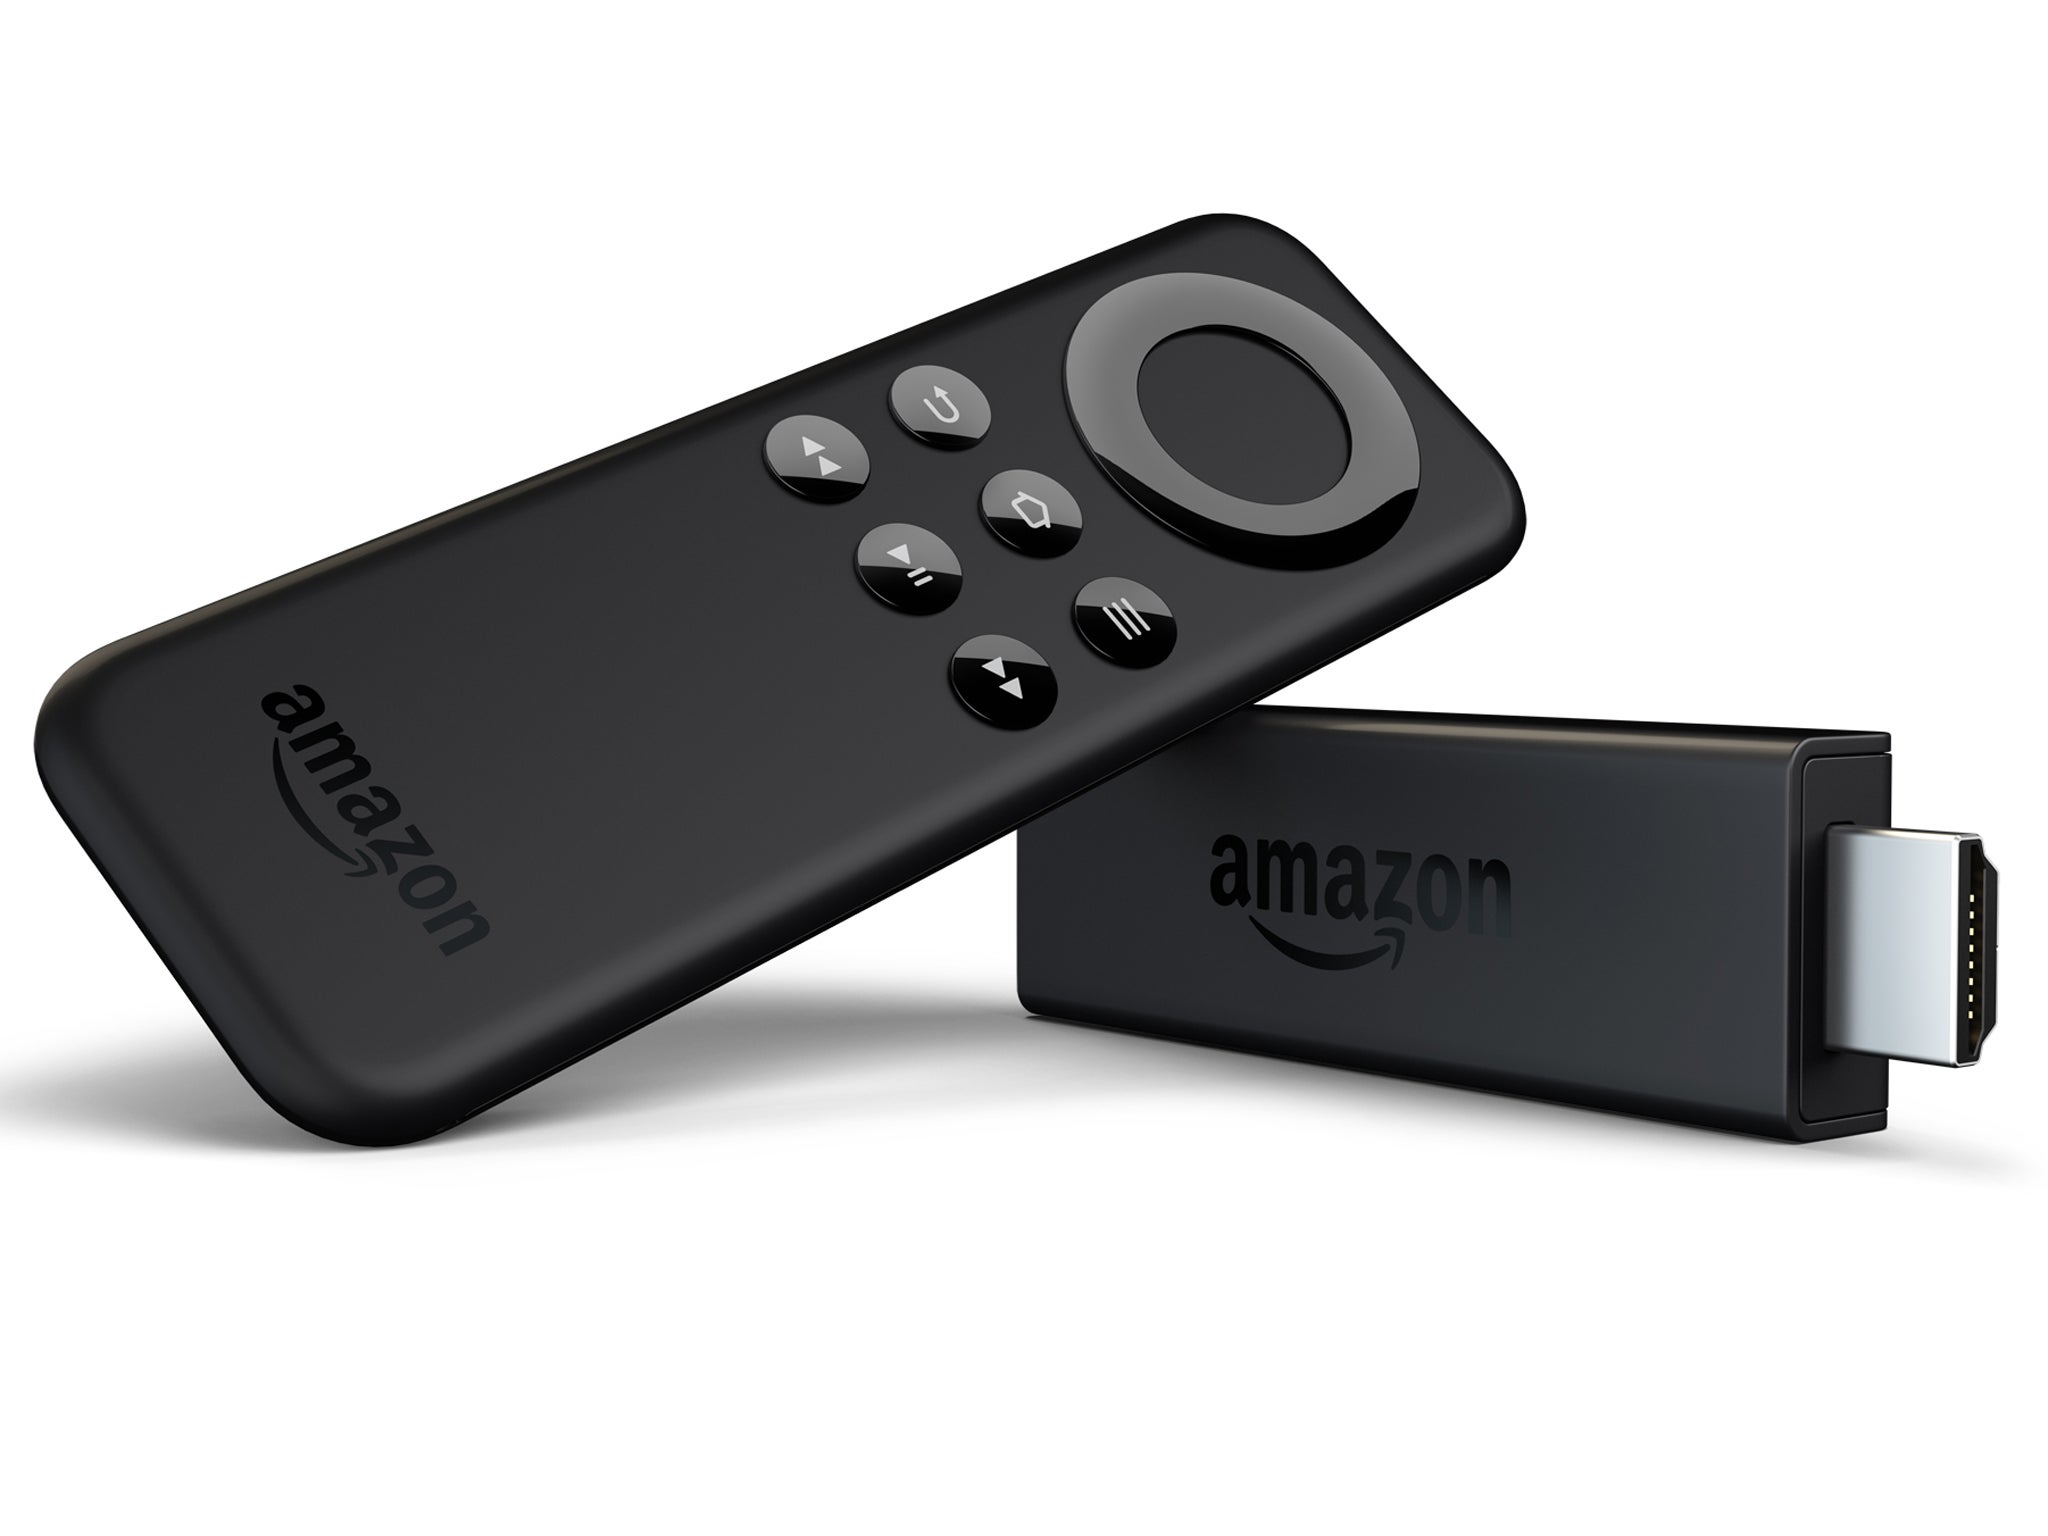 Amazon's new stick is much smaller than its predecessor